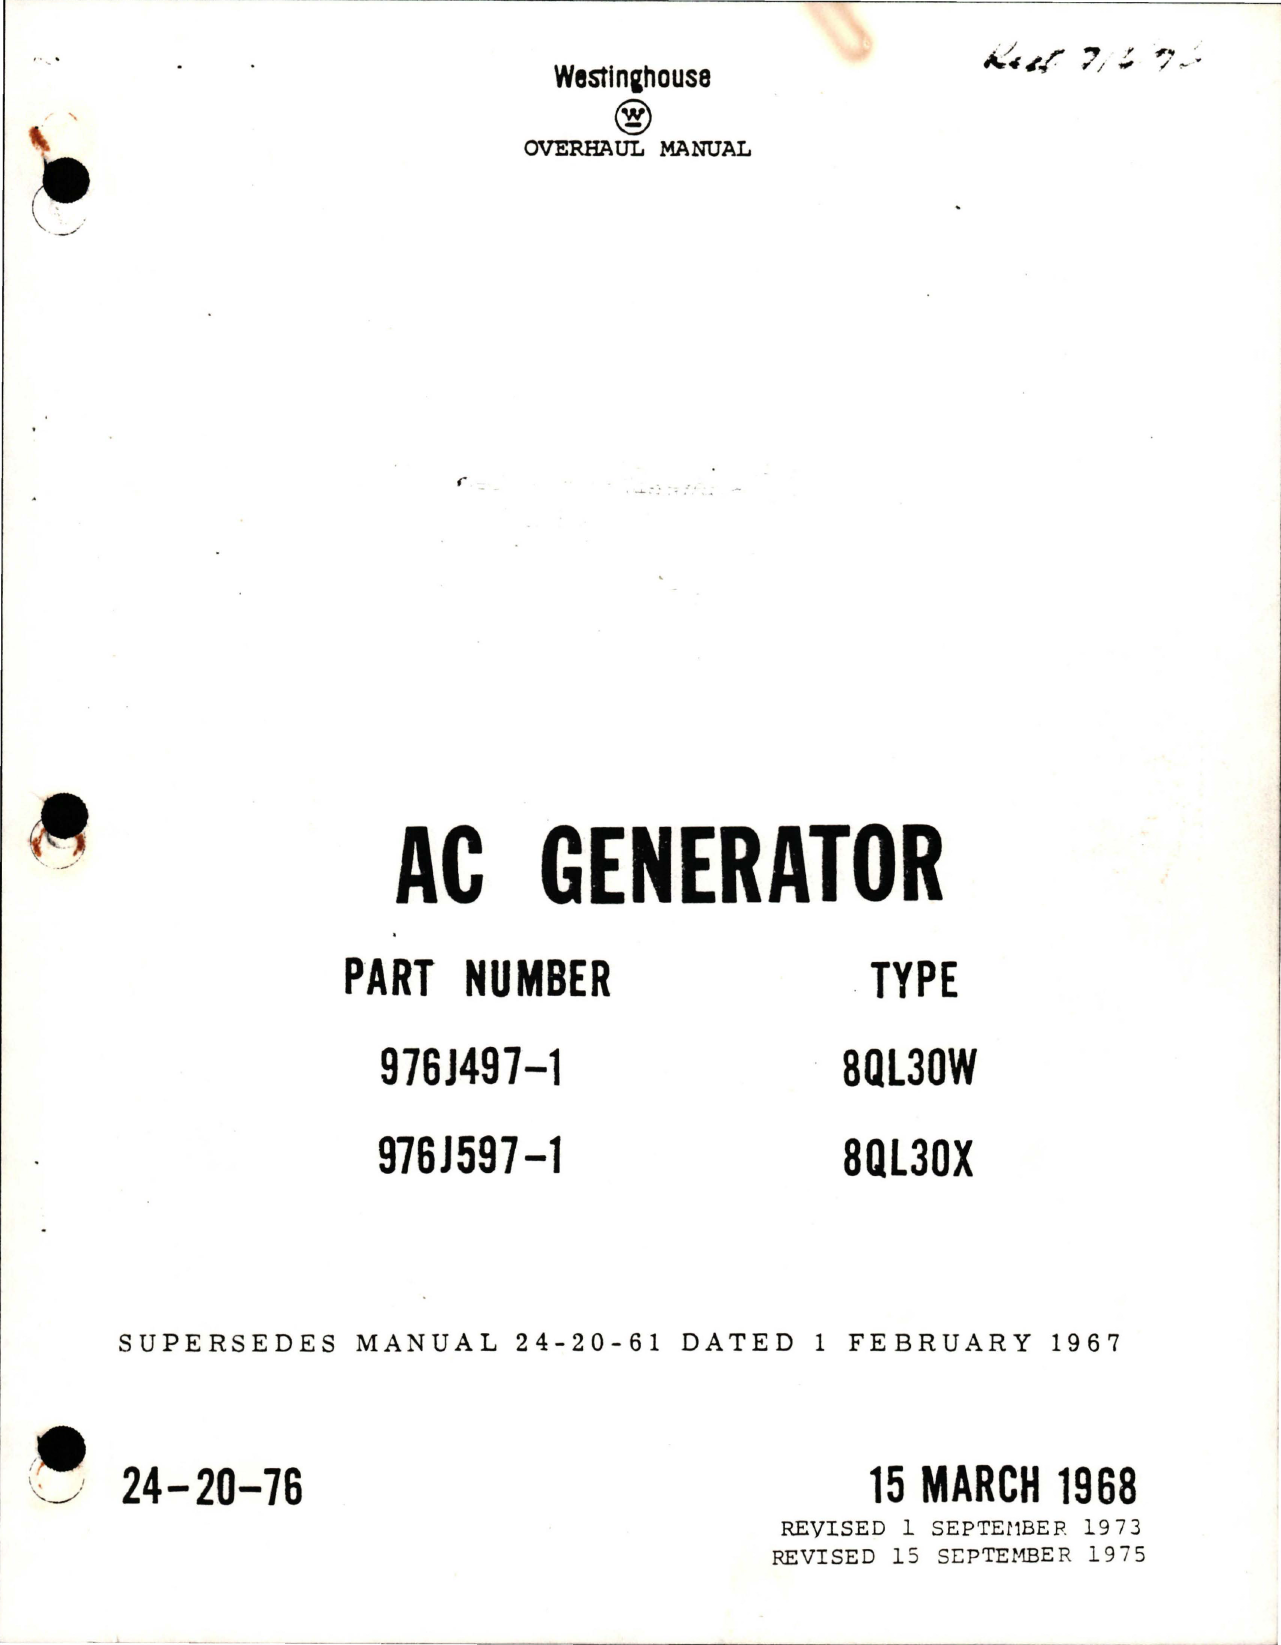 Sample page 1 from AirCorps Library document: Overhaul Manual for AC Generator - Parts 976J497-1 and 976J597-1 - Types 8QL30W and 8QL30X